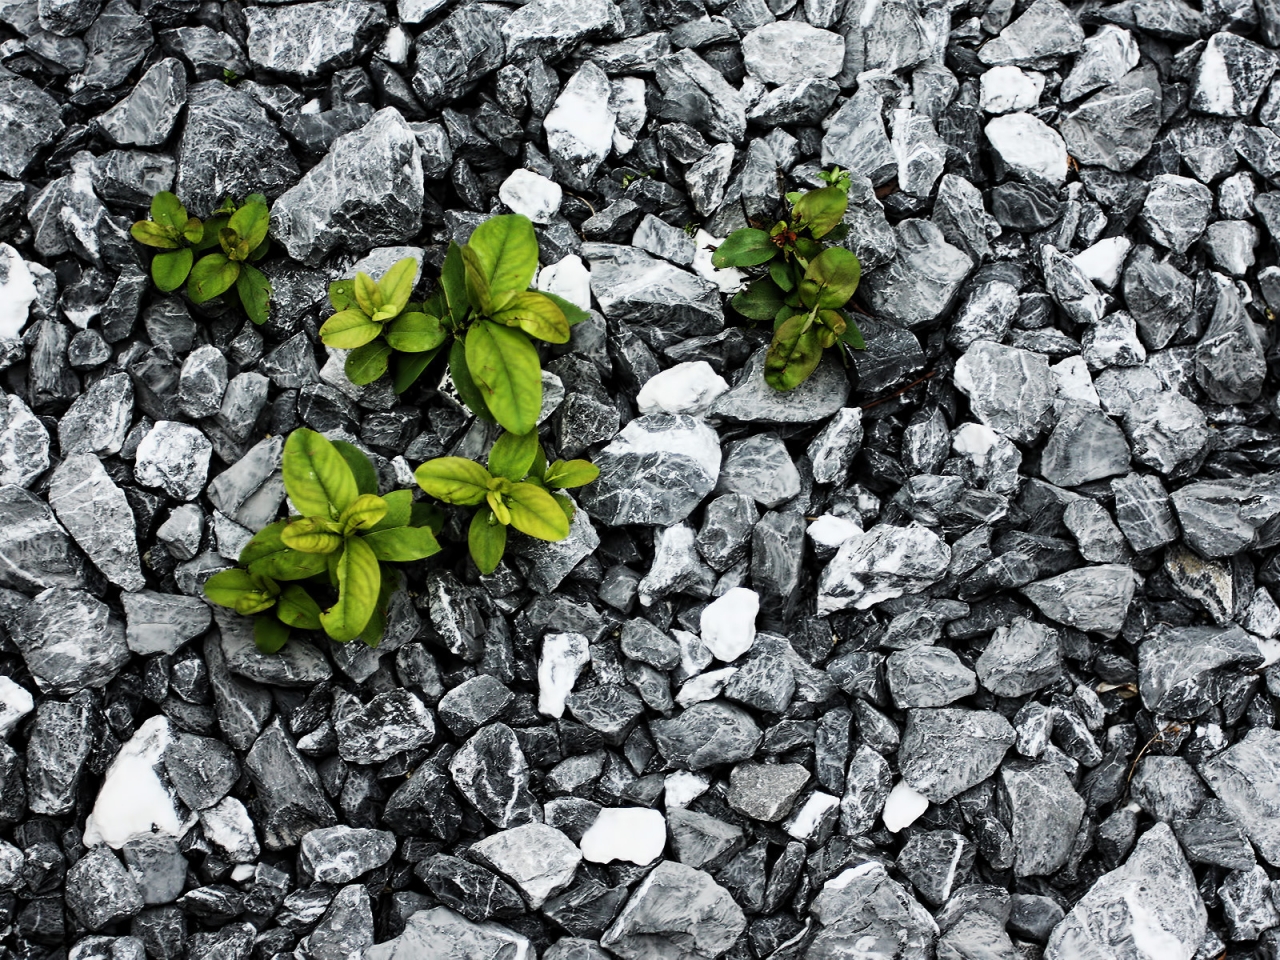 Plants between the stones for 1280 x 960 resolution